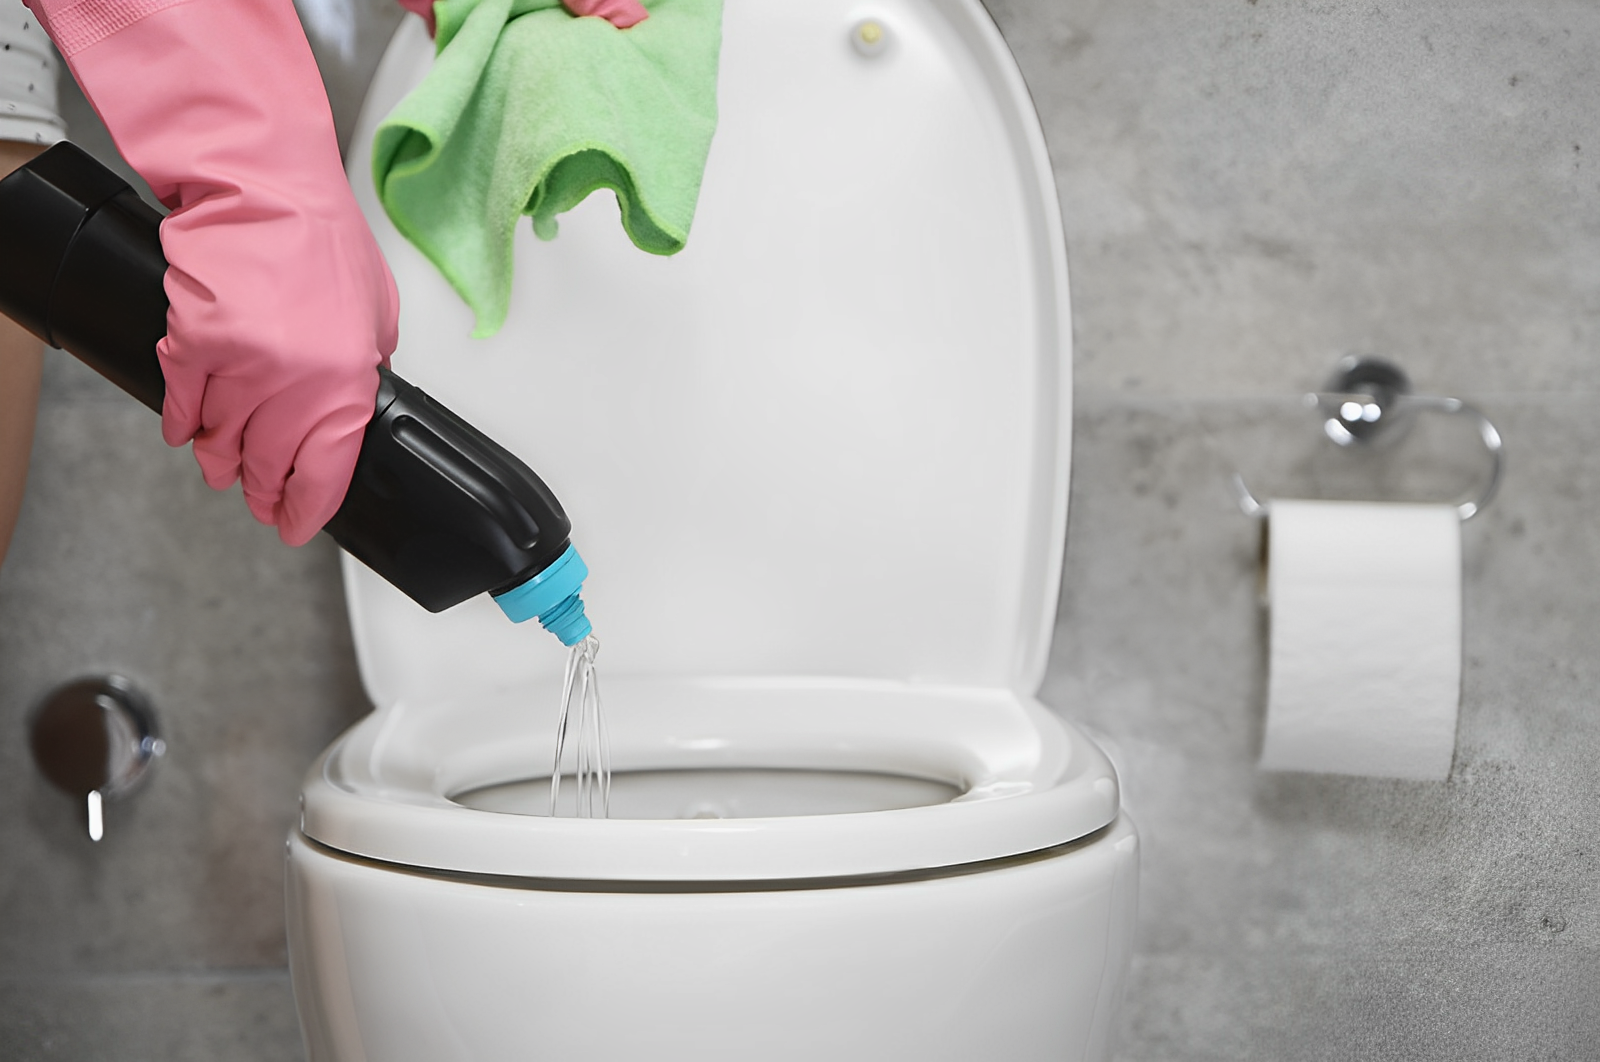 A person wearing gloves cleaning a toilet